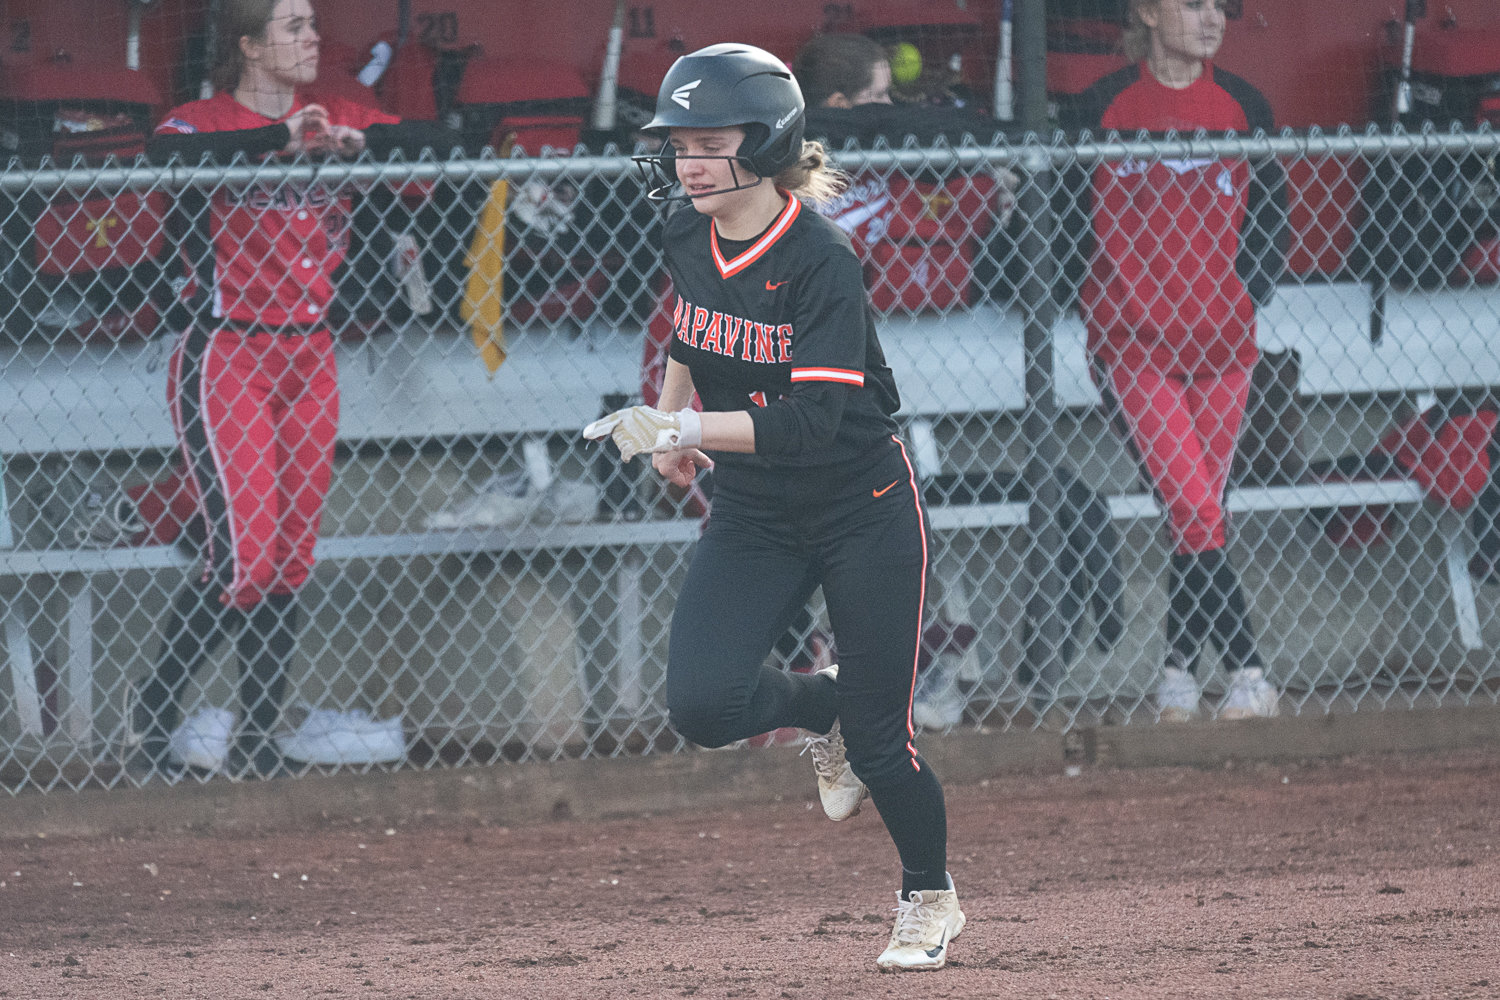 Avery Schutz scores on a play during Napavine's 27-8 win over Tenino on March 14.